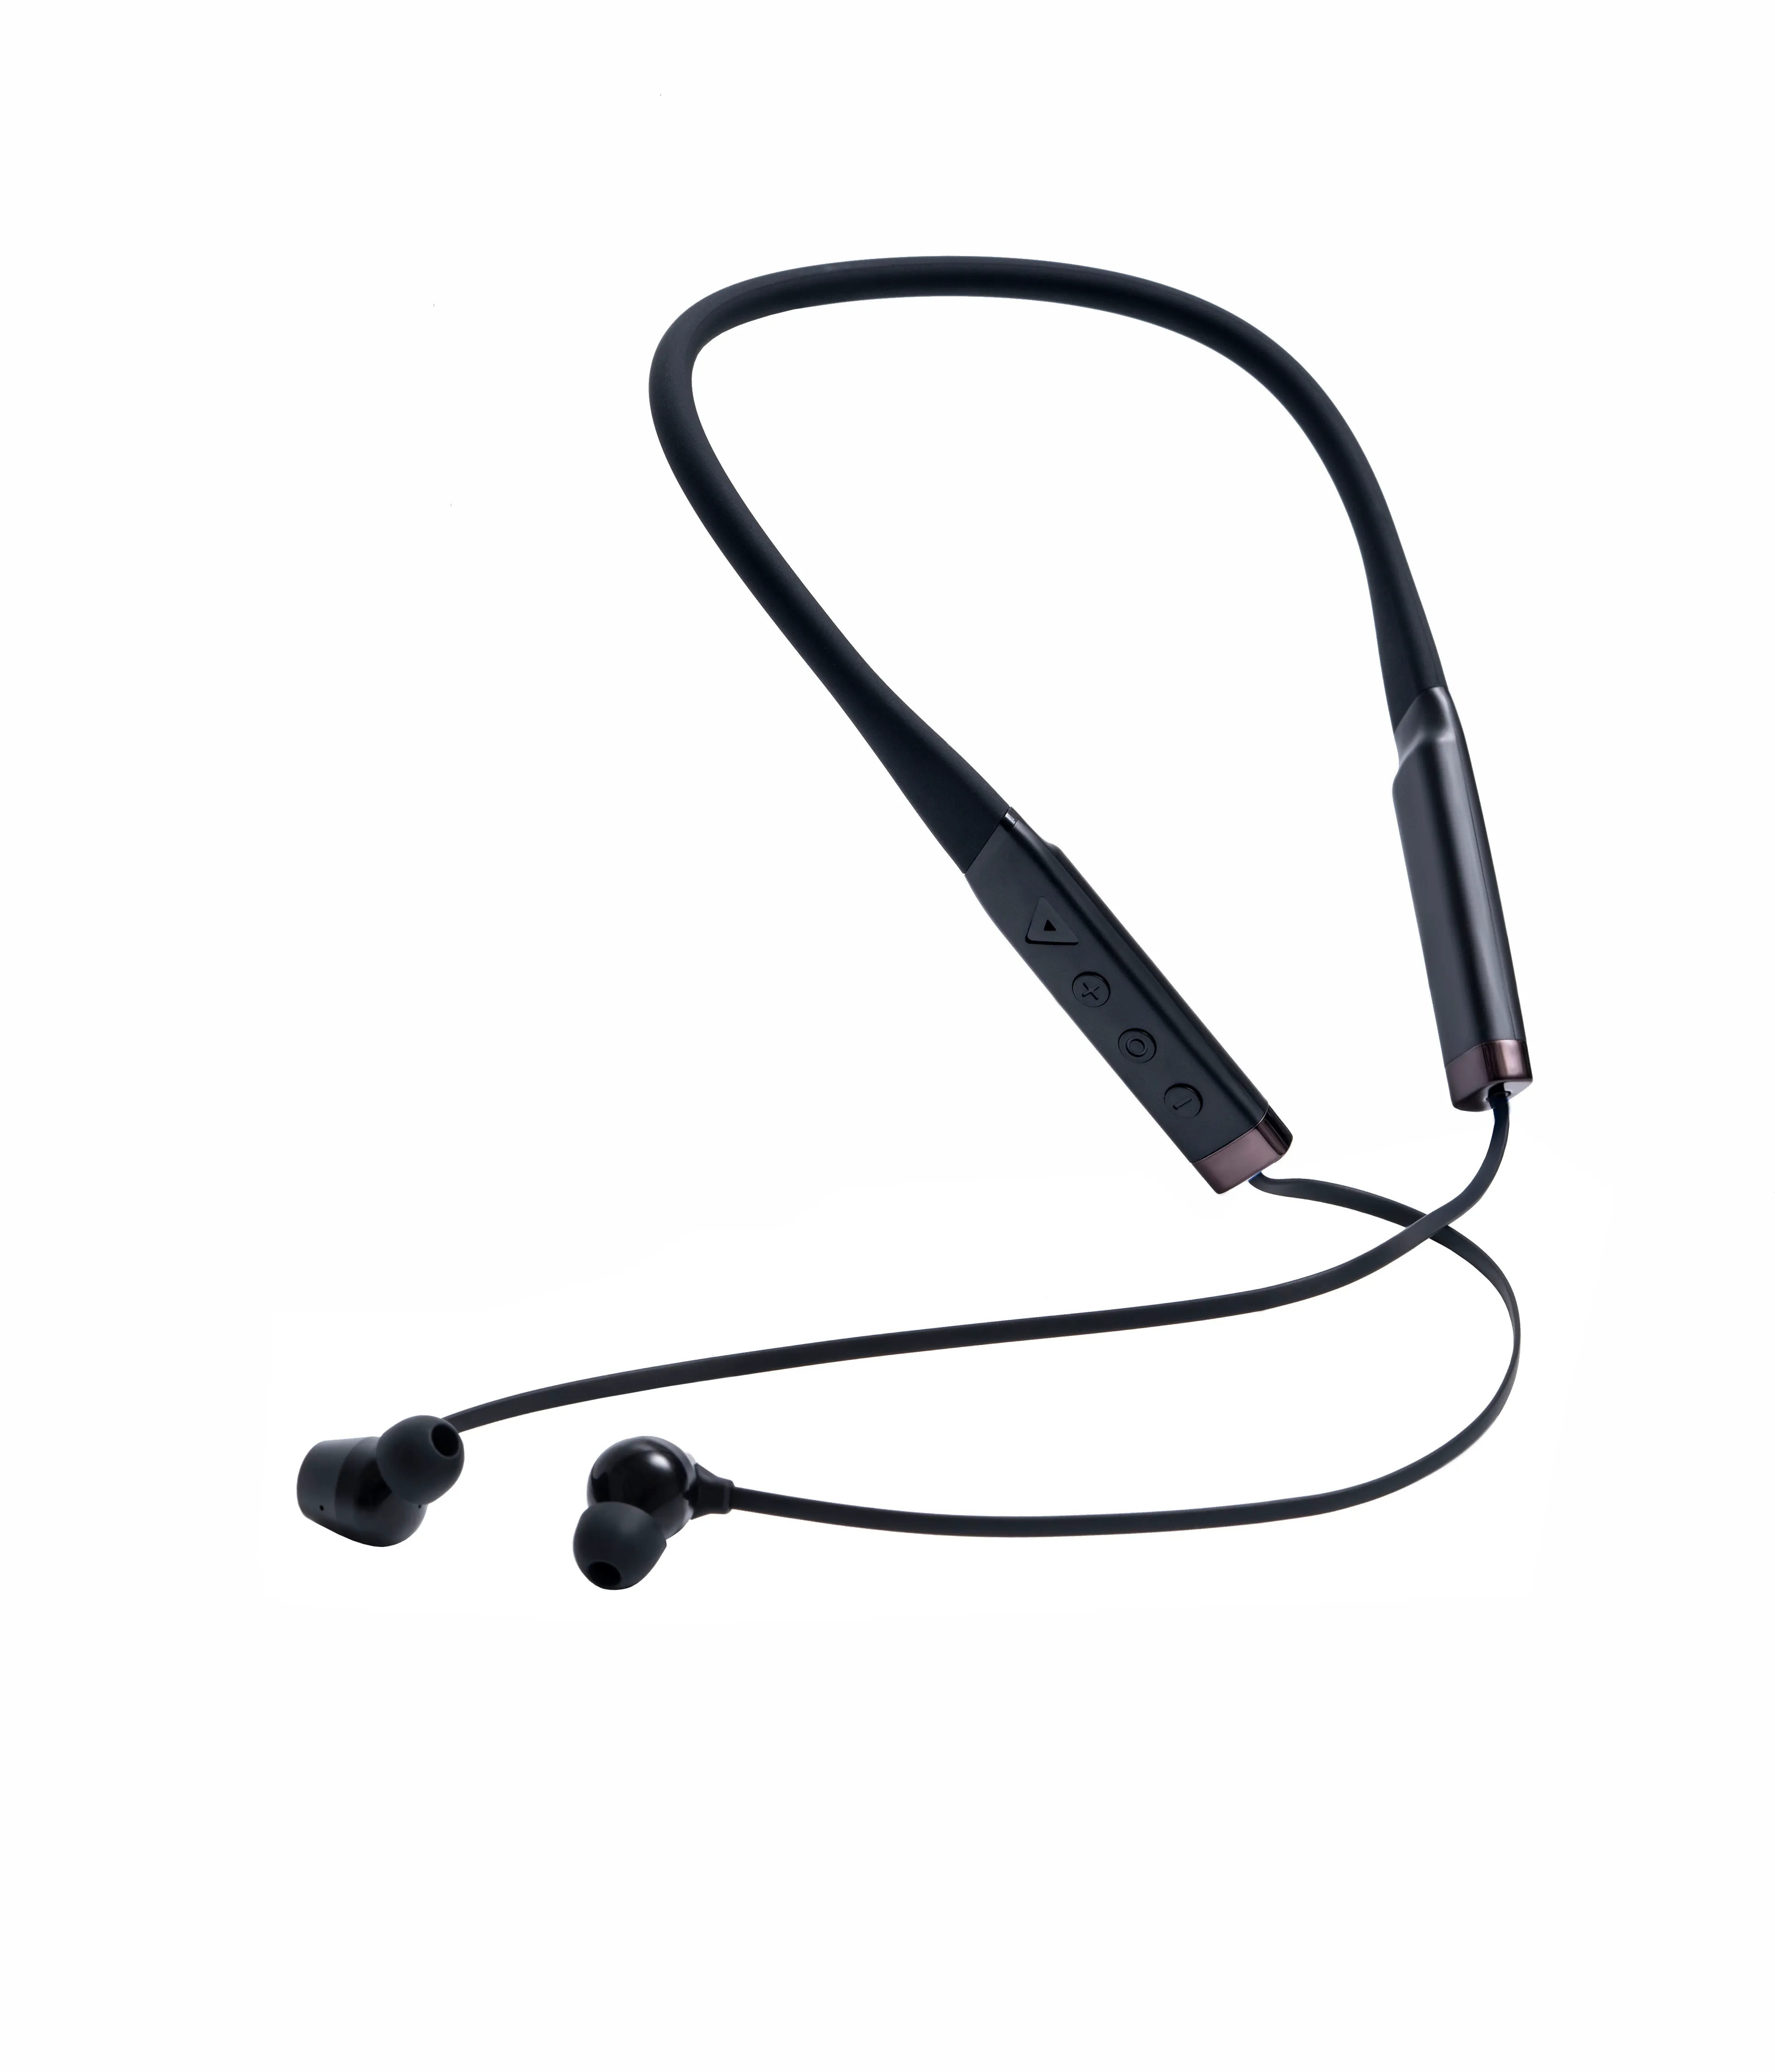 Neckband Bluetooth Headphones V5.2 25H Playtime Fast Charging Running Headphones premium sound quality with Noise Cancelling for Sports